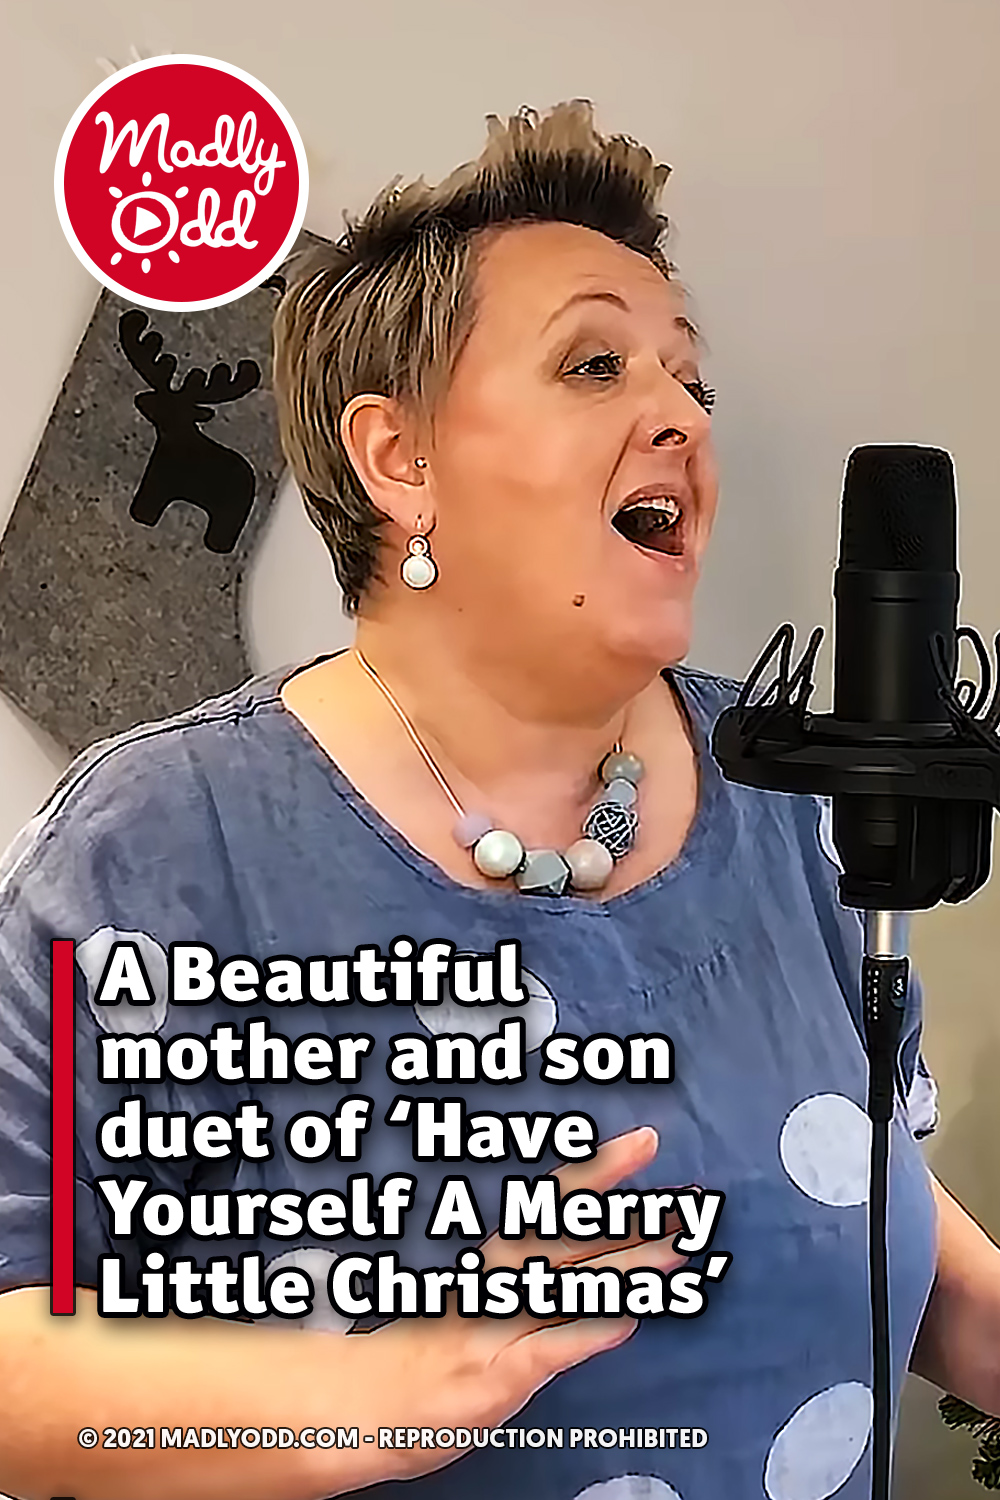 A Beautiful mother and son duet of ‘Have Yourself A Merry Little Christmas’